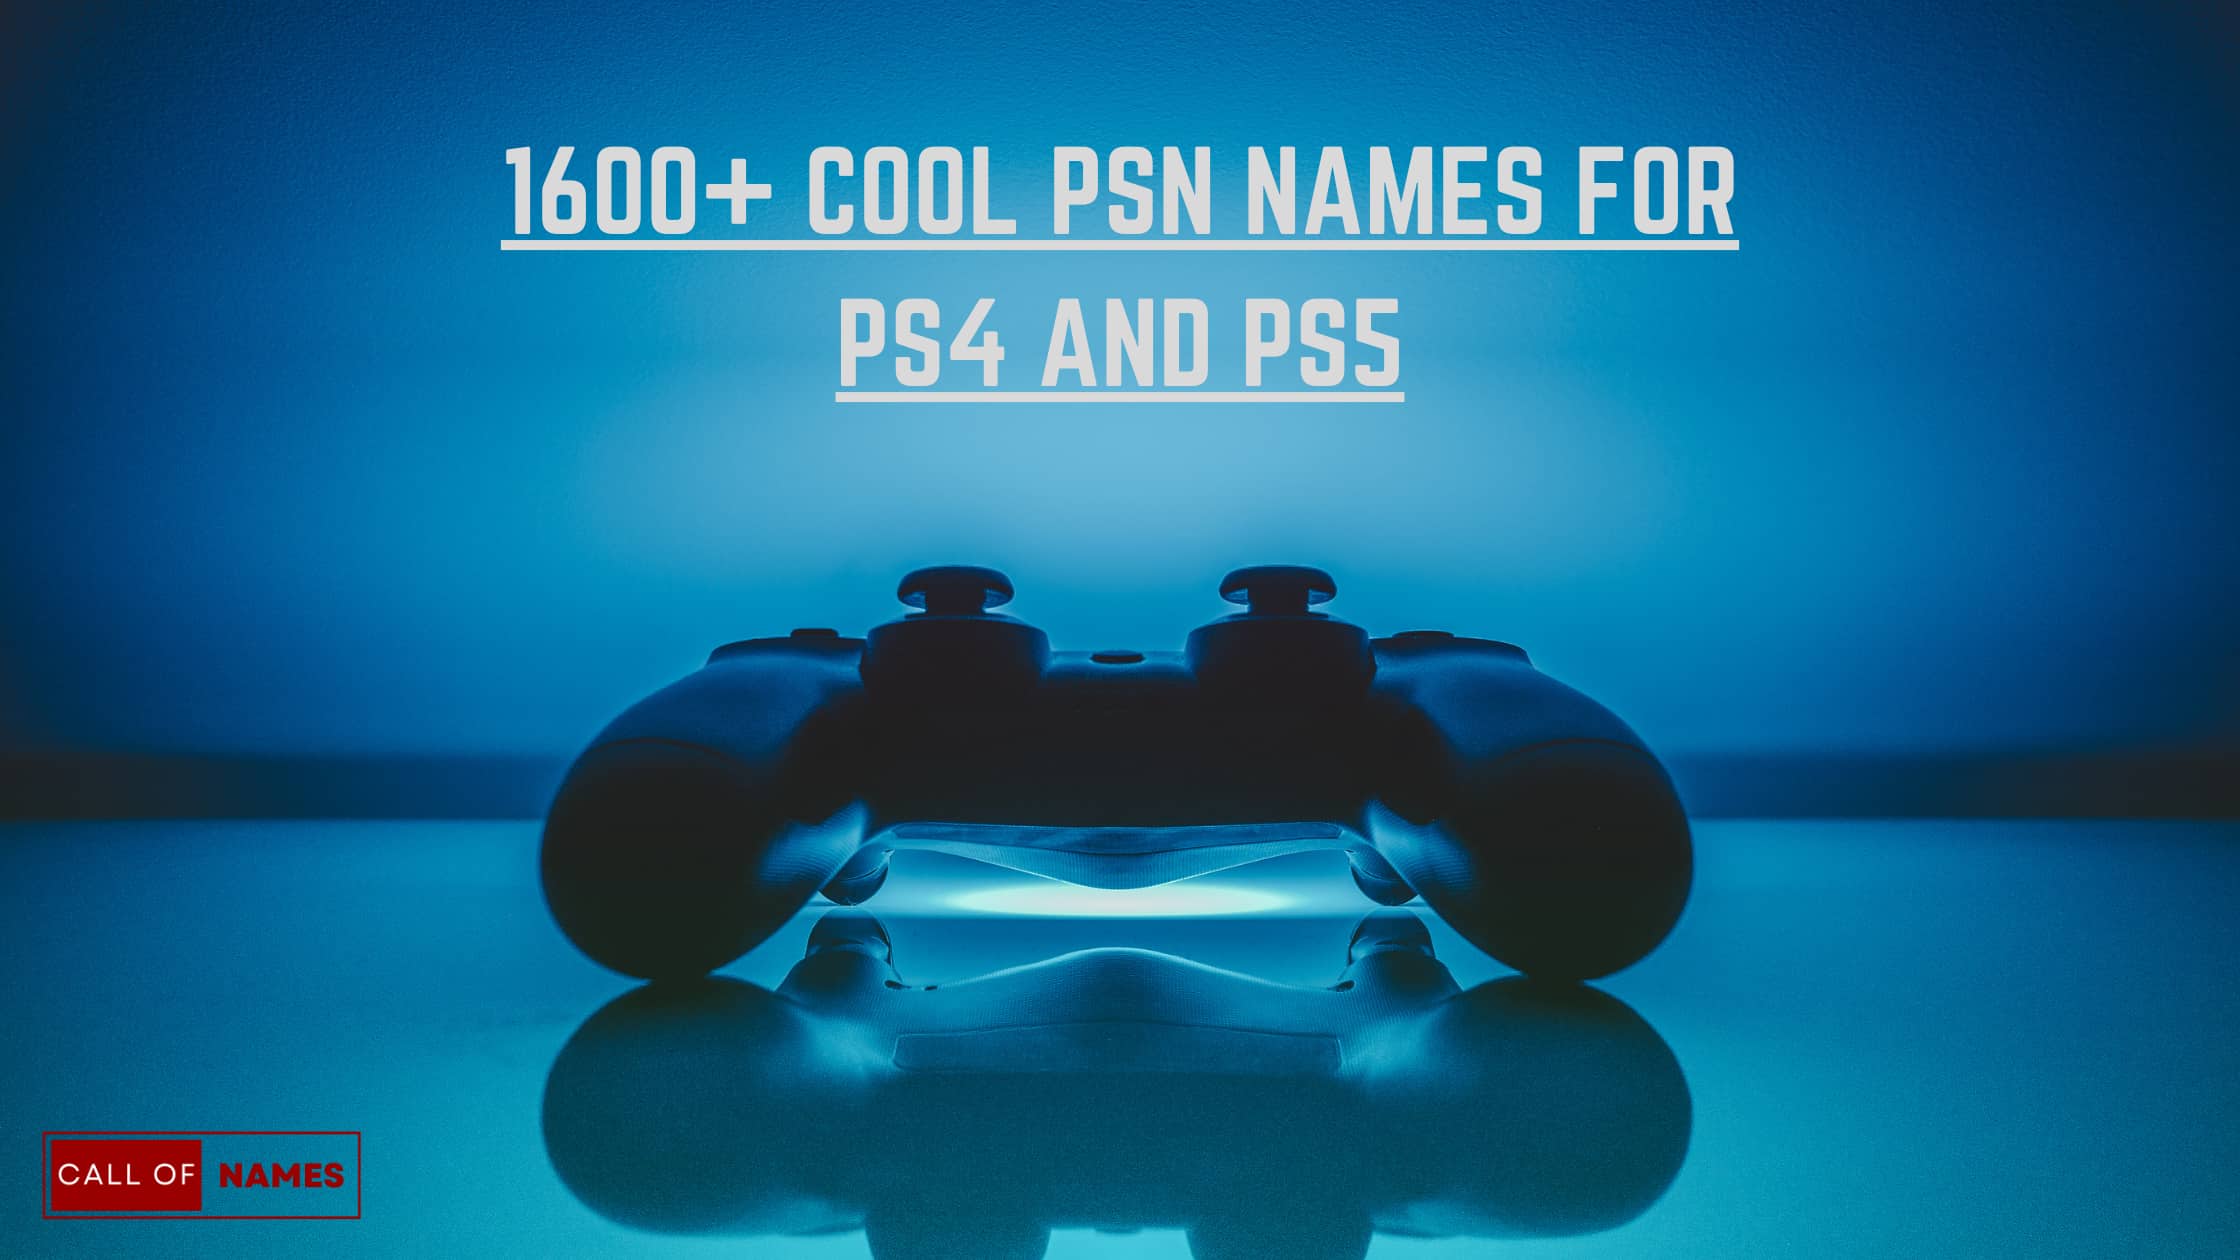 PSN-Names-for-PS4-and-PS5